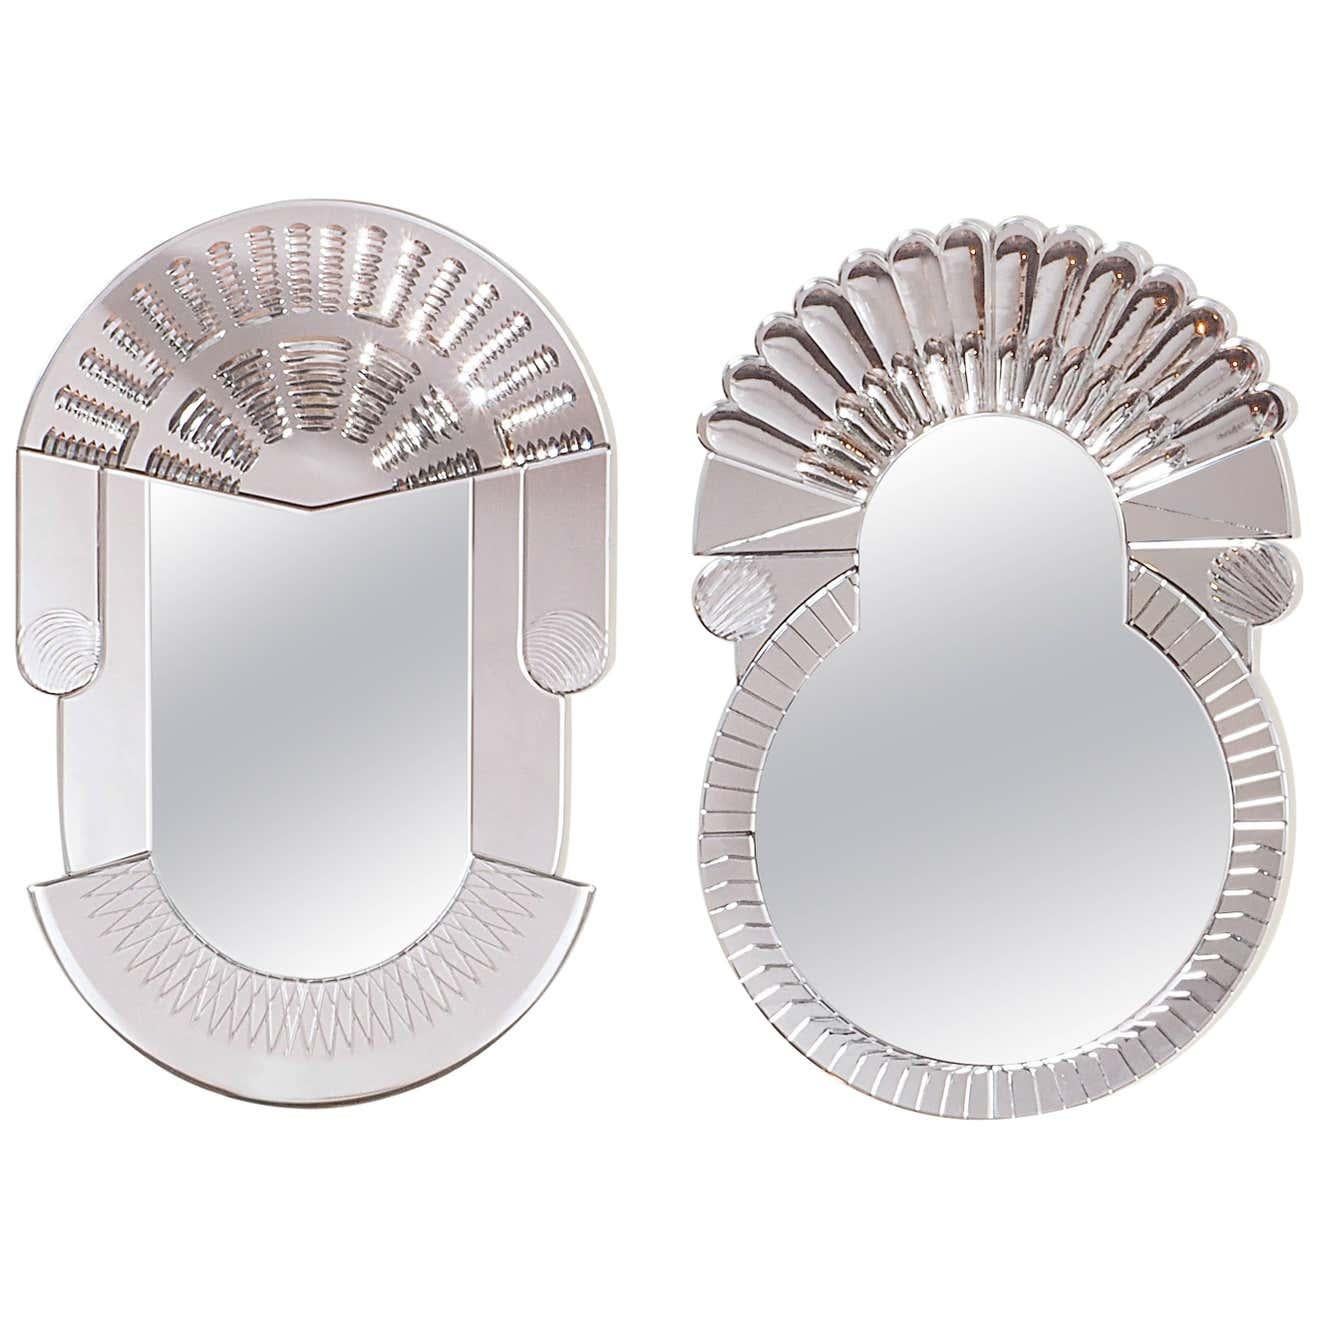 Set of 2 large scena Murano mirrors by Nikolai Kotlarczyk. 
Dimensions: 
Olympic: D 3 x W 60 x H 90 cm 
Rotonda: D 3 x W 60 x H 90 cm 
Materials: silvered carved glass, golden carved polished steel. Nembro marble (base).
Also available in